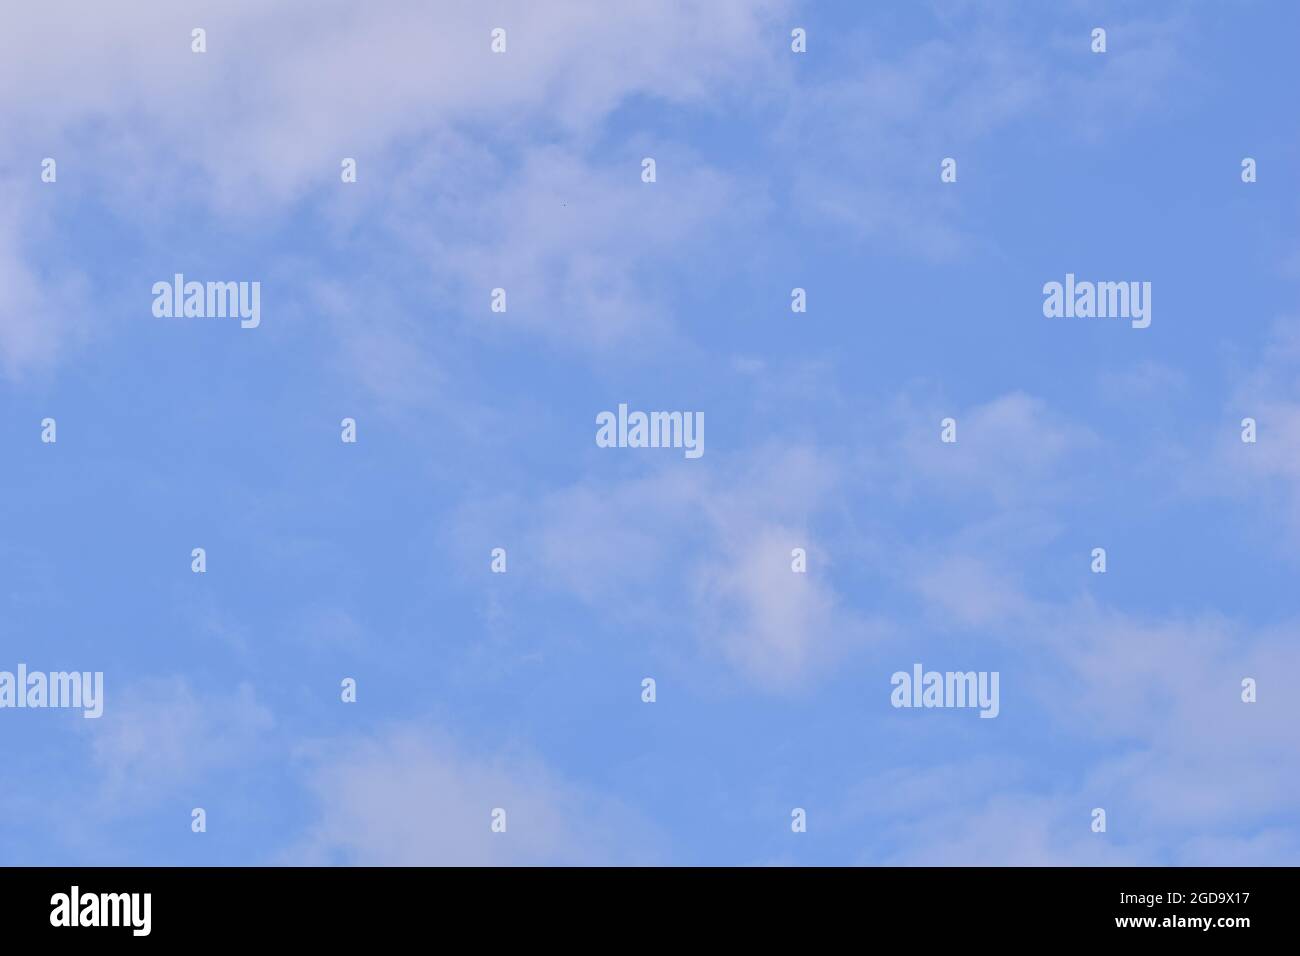 Wide blue sky with a few white clouds Stock Photo